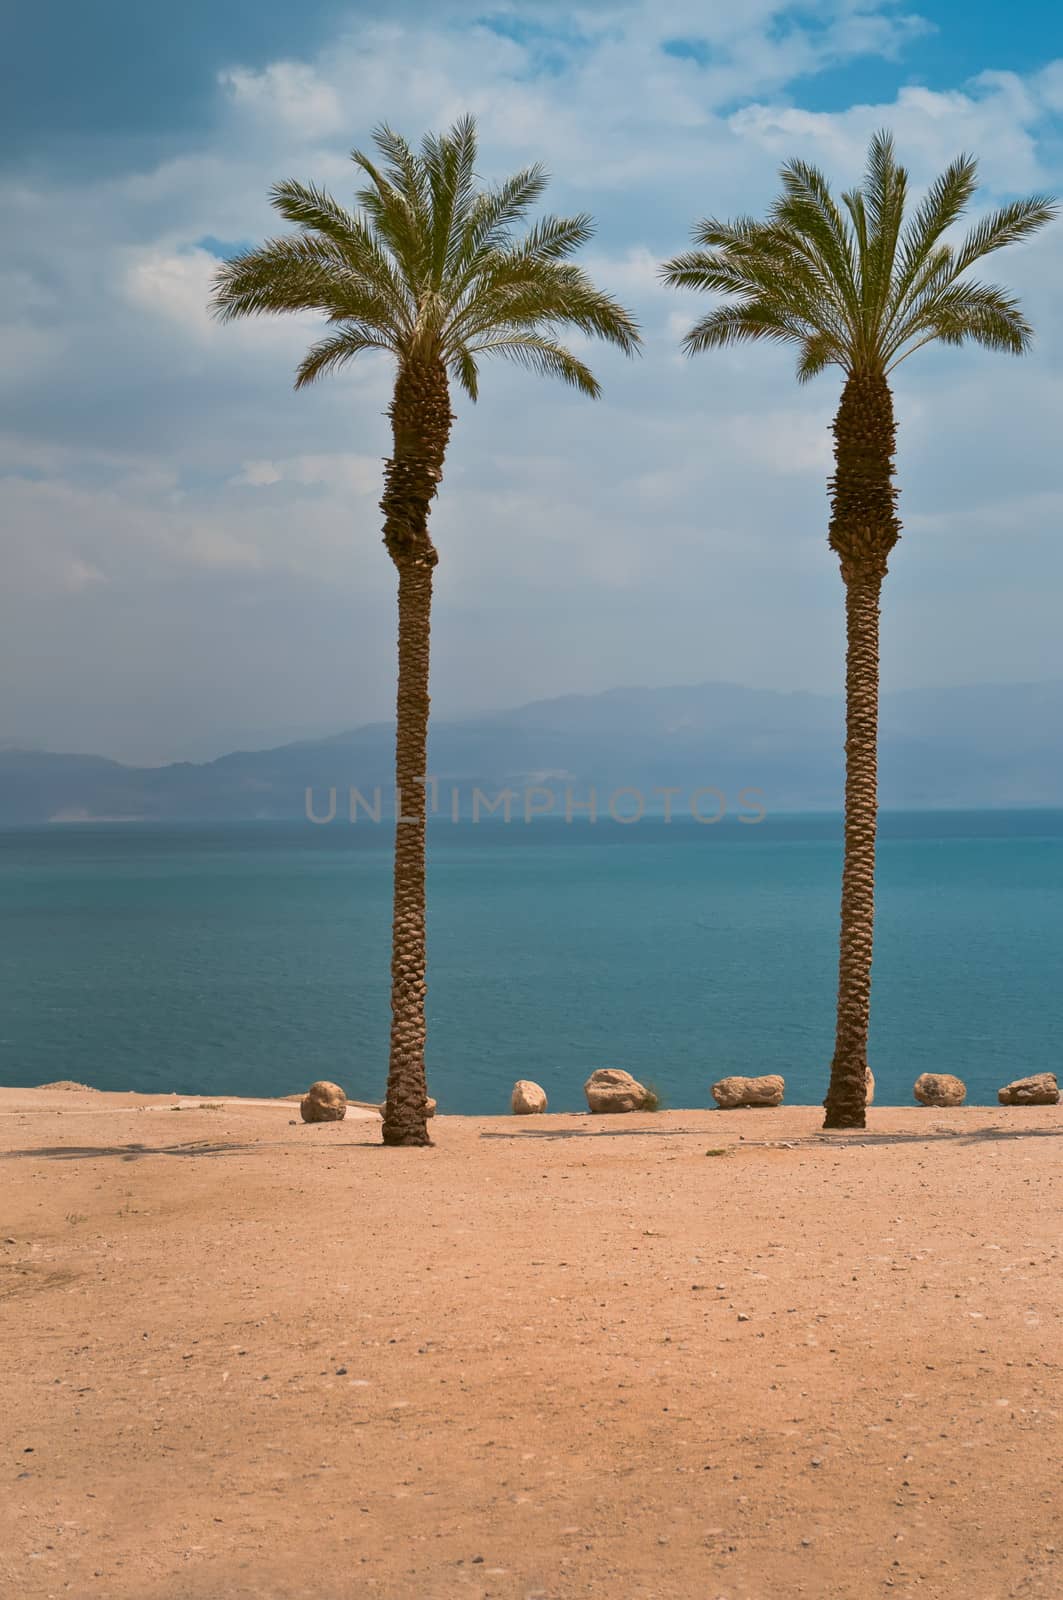 Oasis on the shore of the Dead Sea. Israel